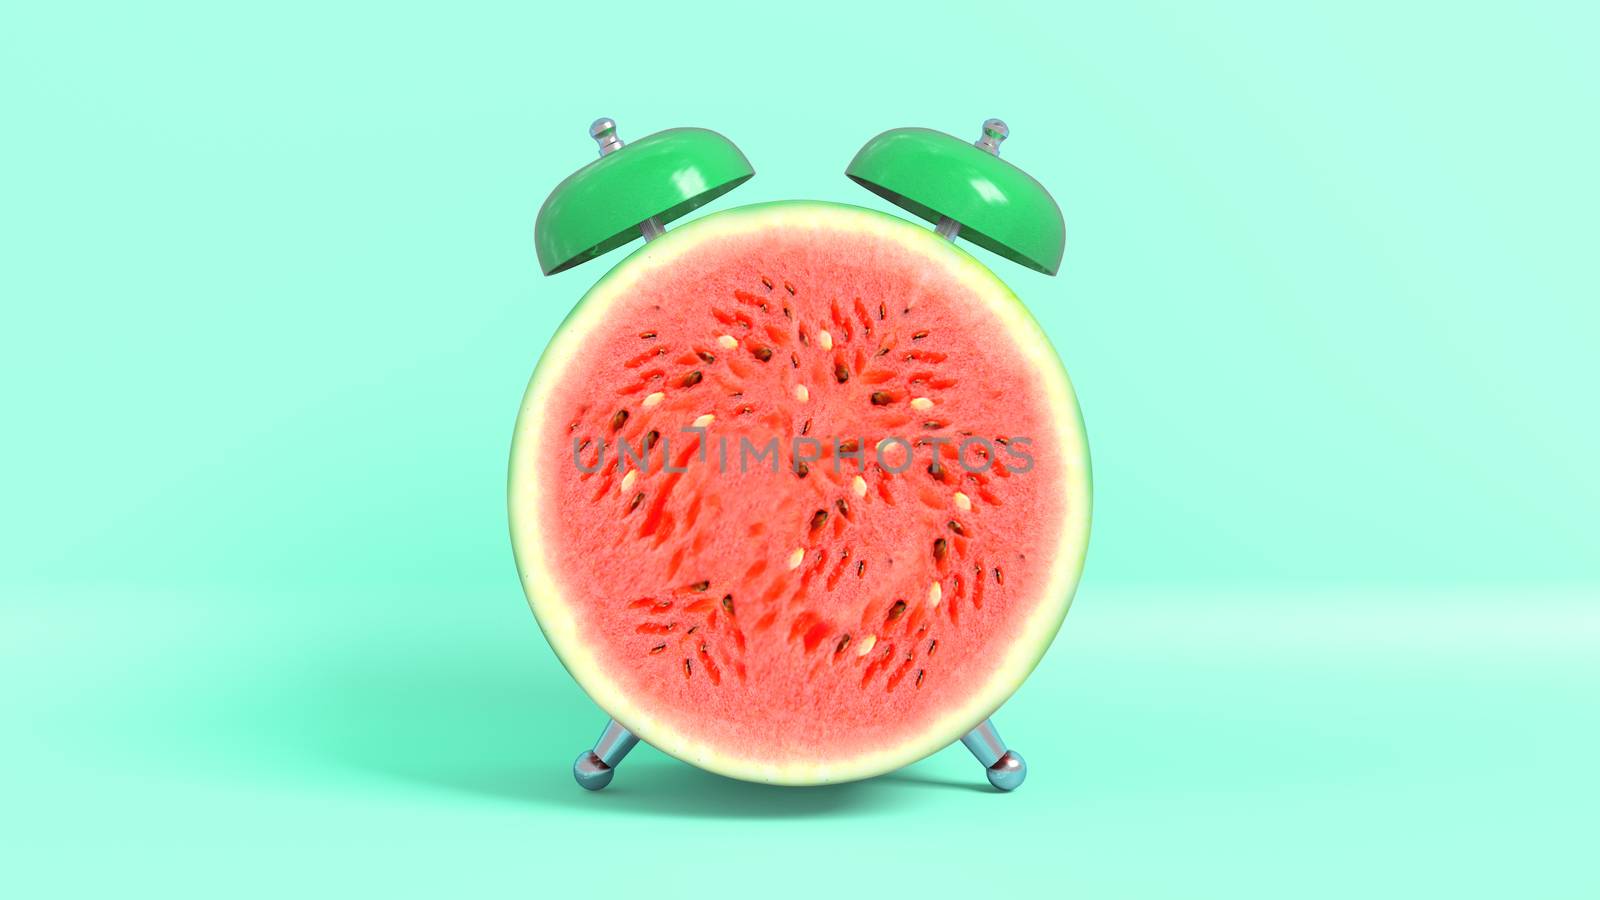 Wake up vintage morning shaped watermelon. Concept illustrating that it is time to take vitamins. 3D rendering.